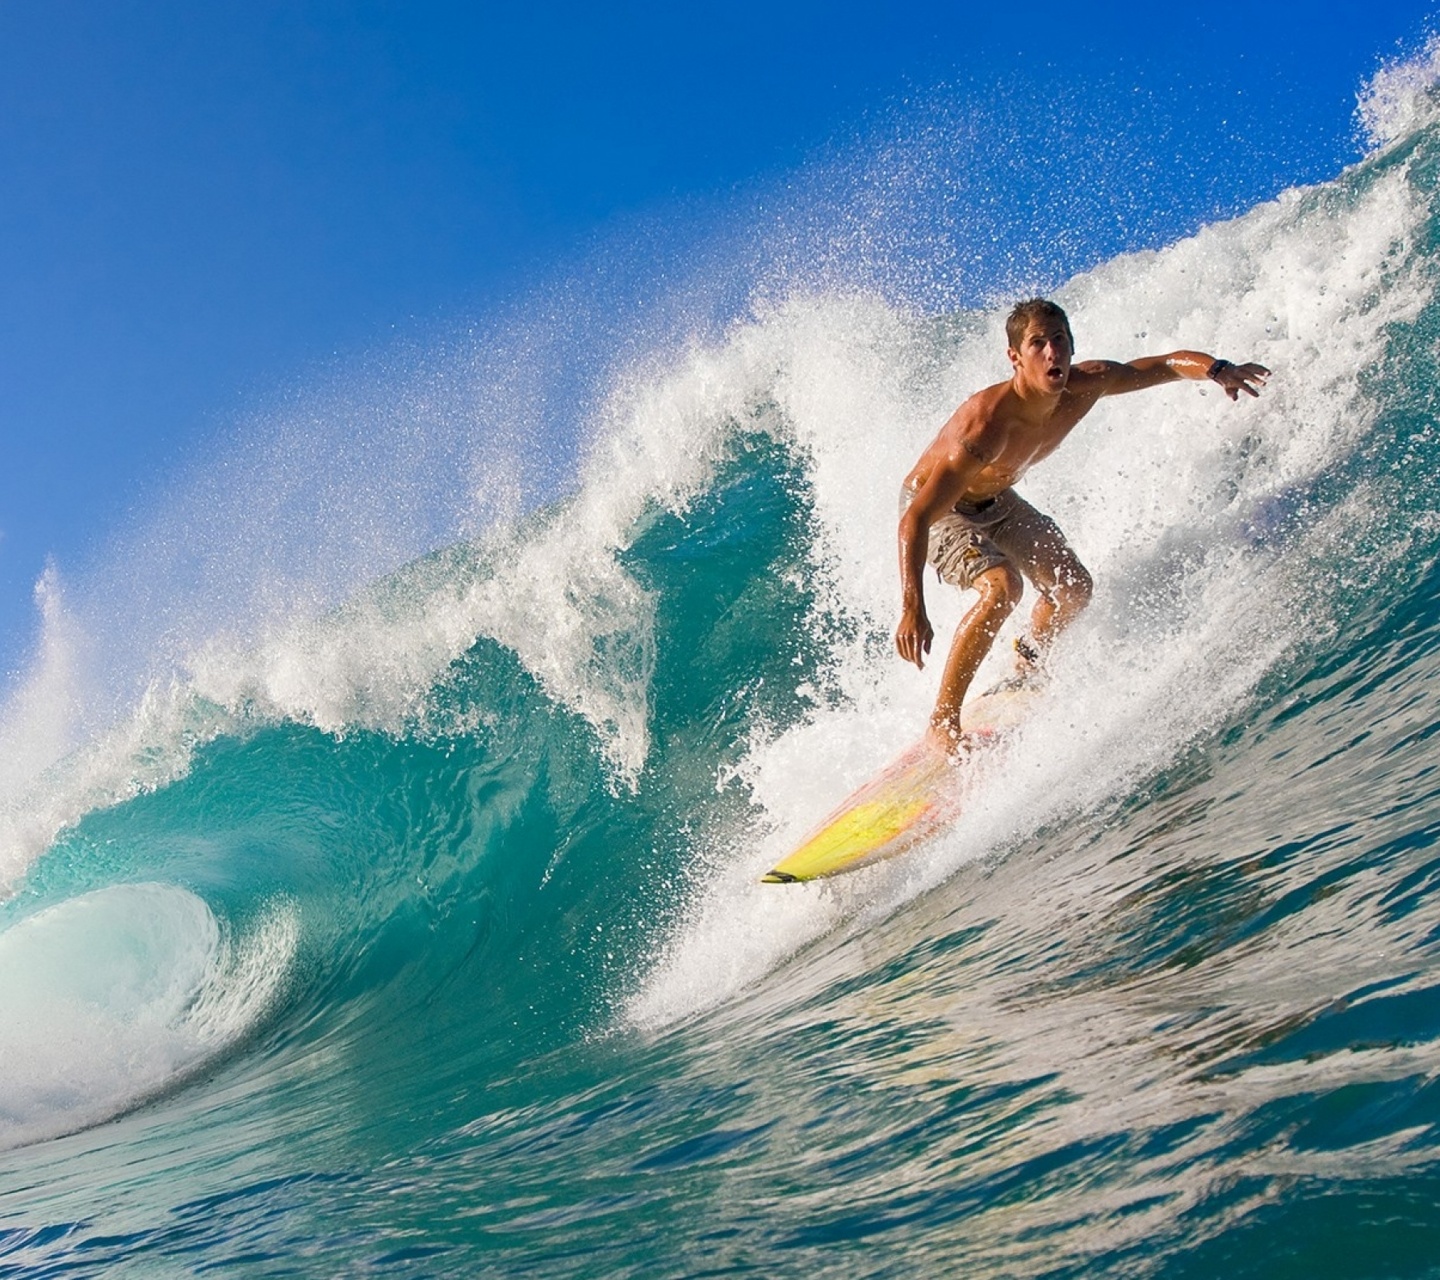  free 1440x1280 surfing 1440x1280 wallpaper screensaver preview id